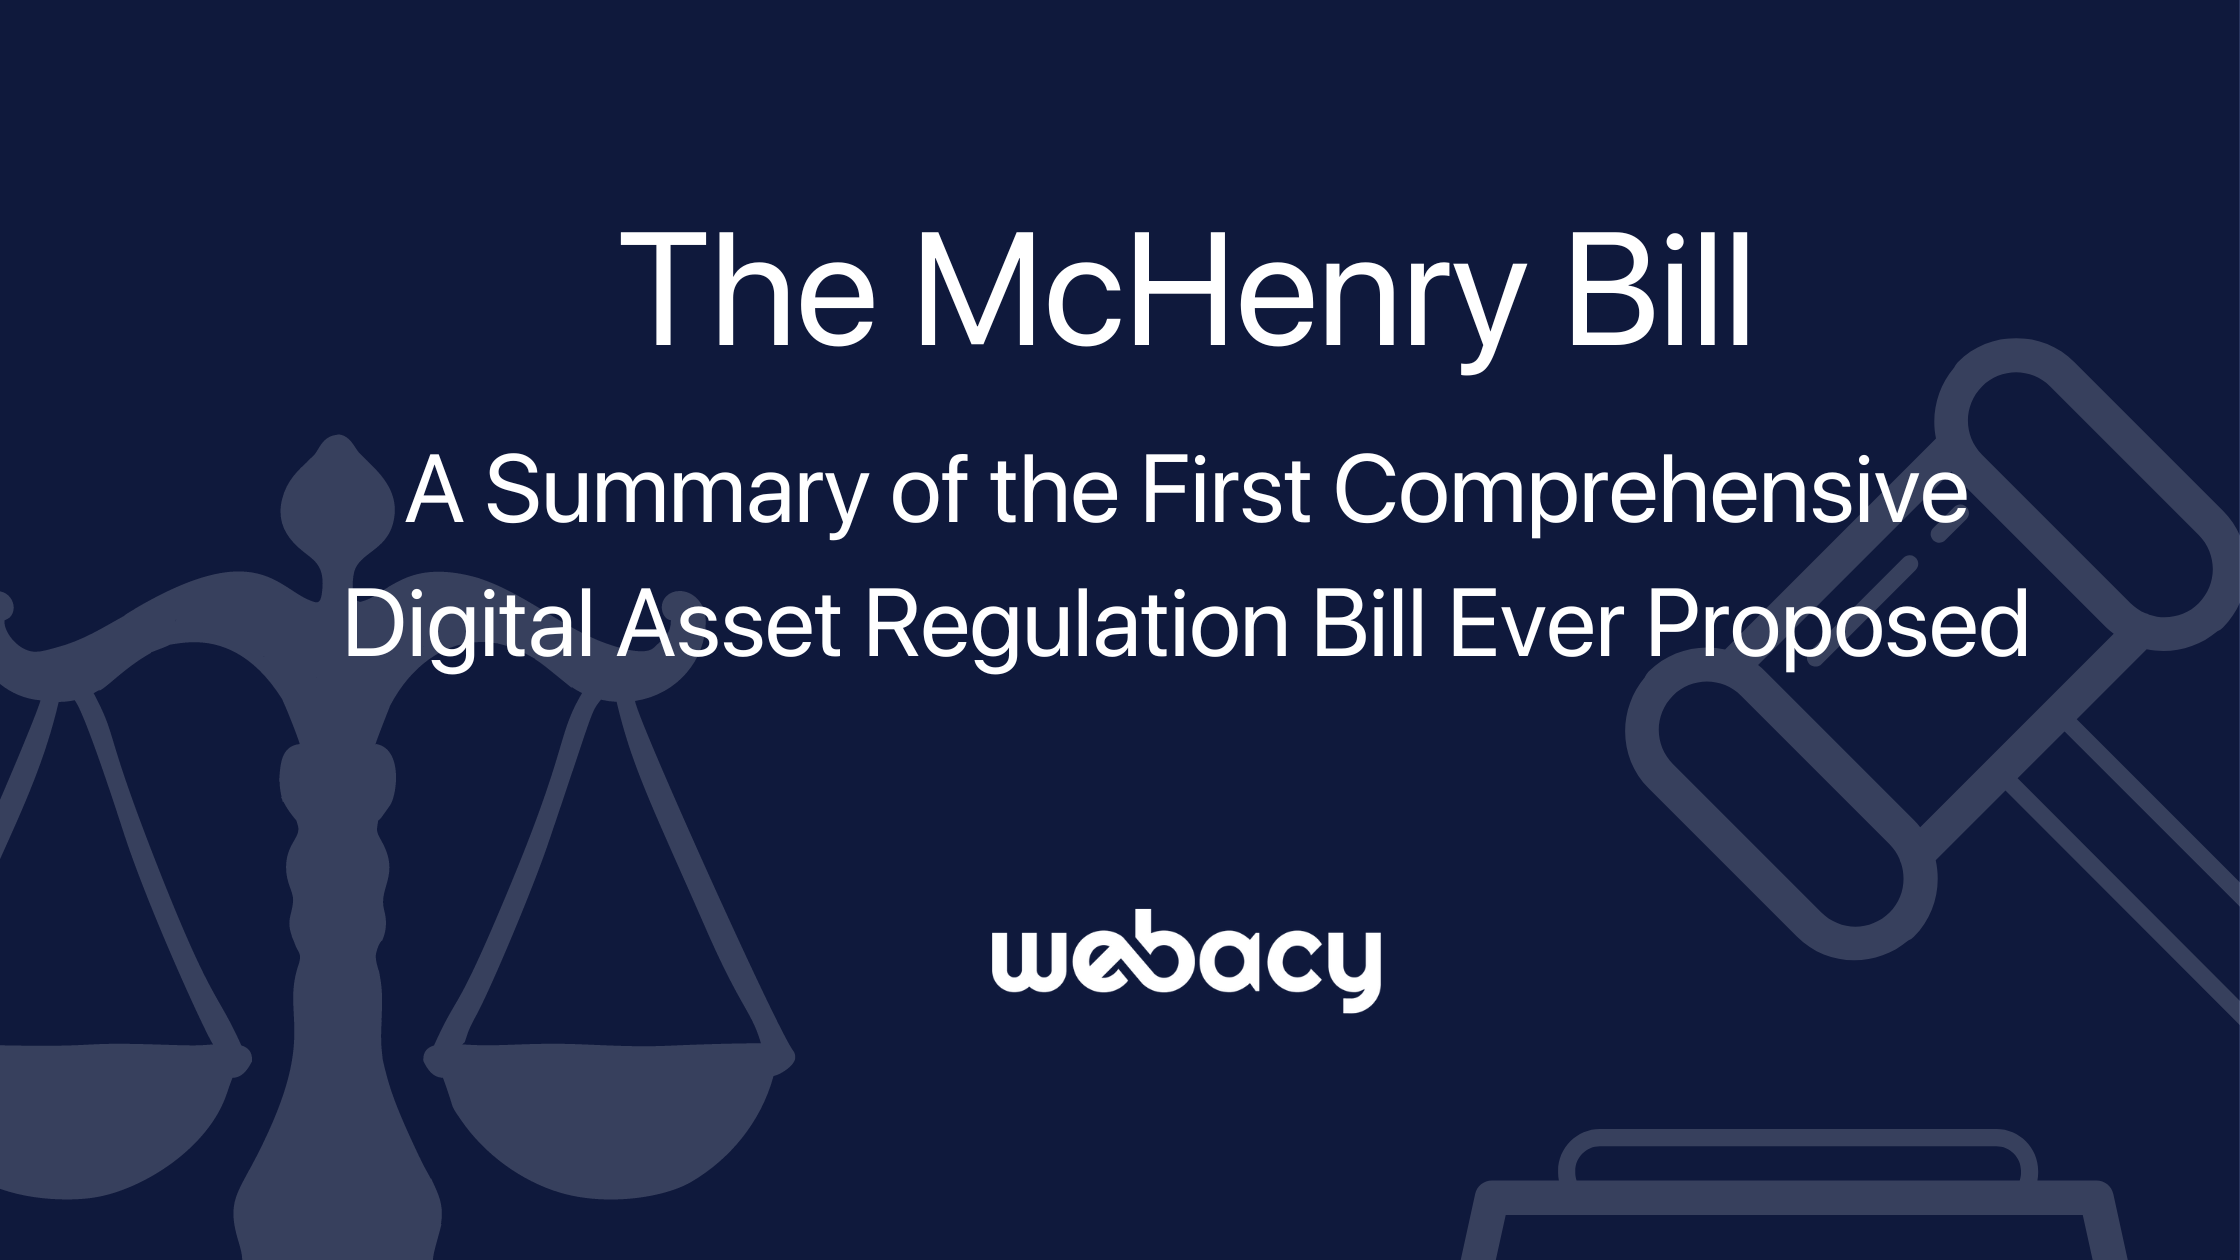 The McHenry Bill: A Summary of the First Comprehensive Digital Asset Regulation Bill Ever Proposed